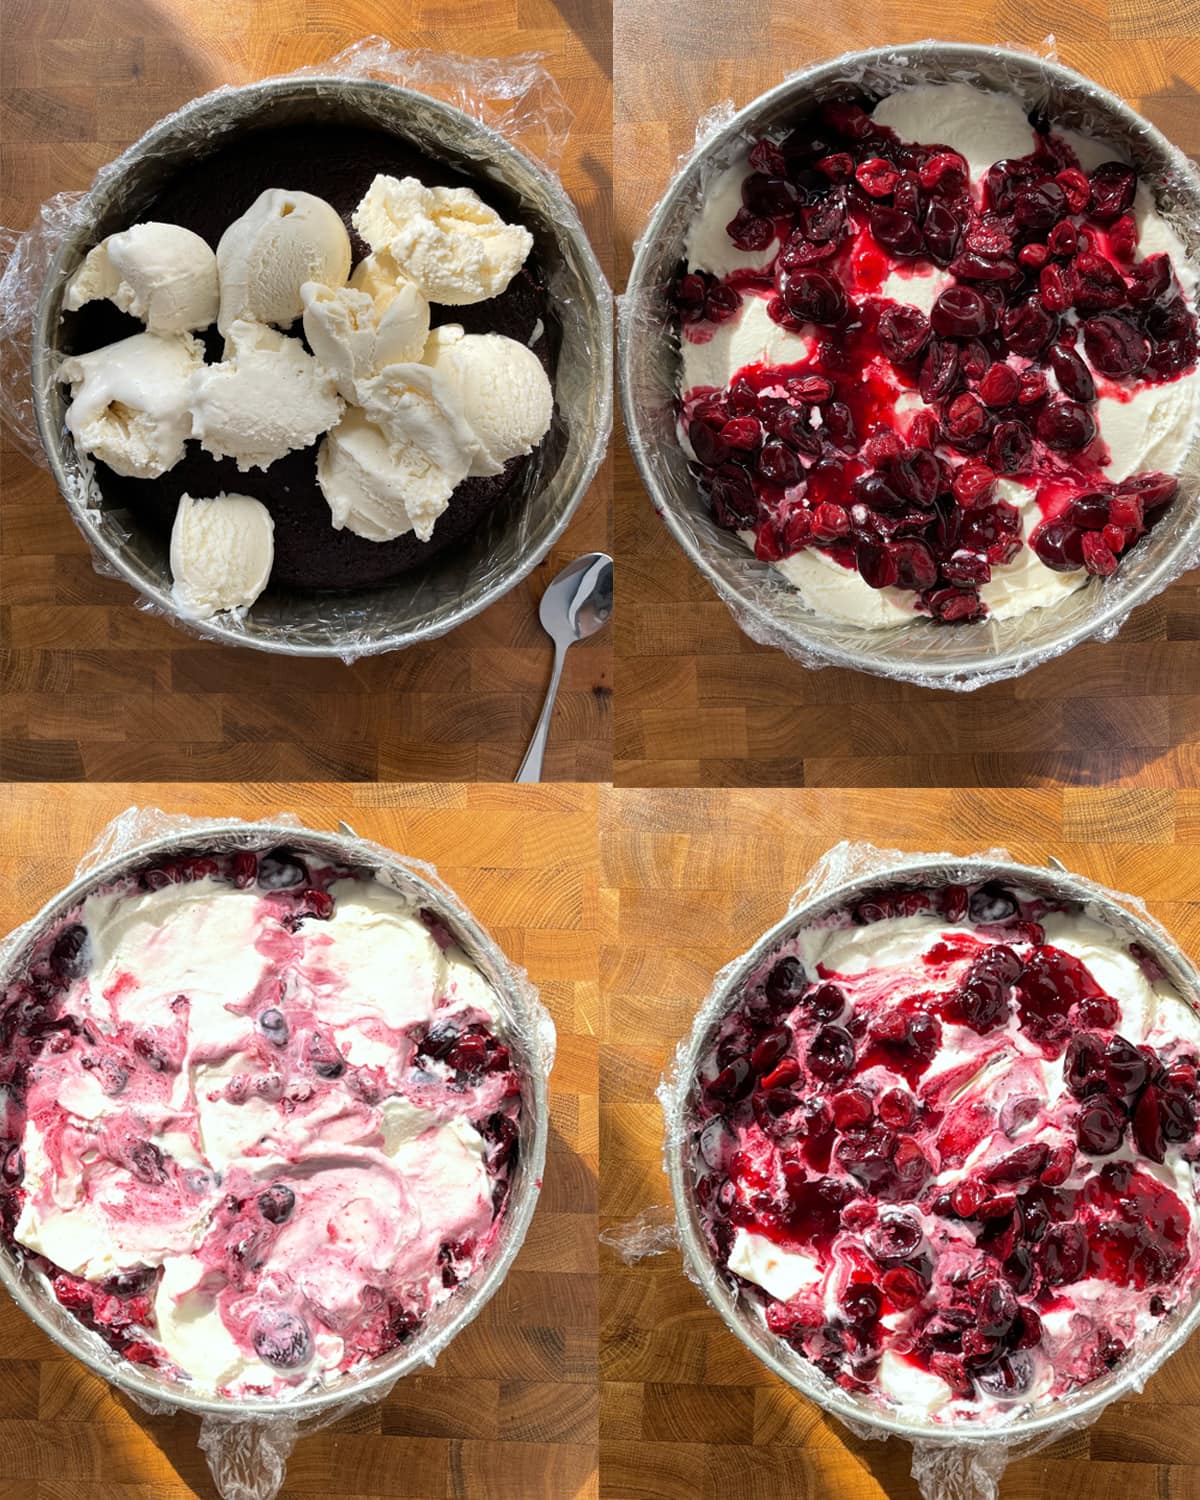 Process of layering and assembling a black forest ice cream cake. 